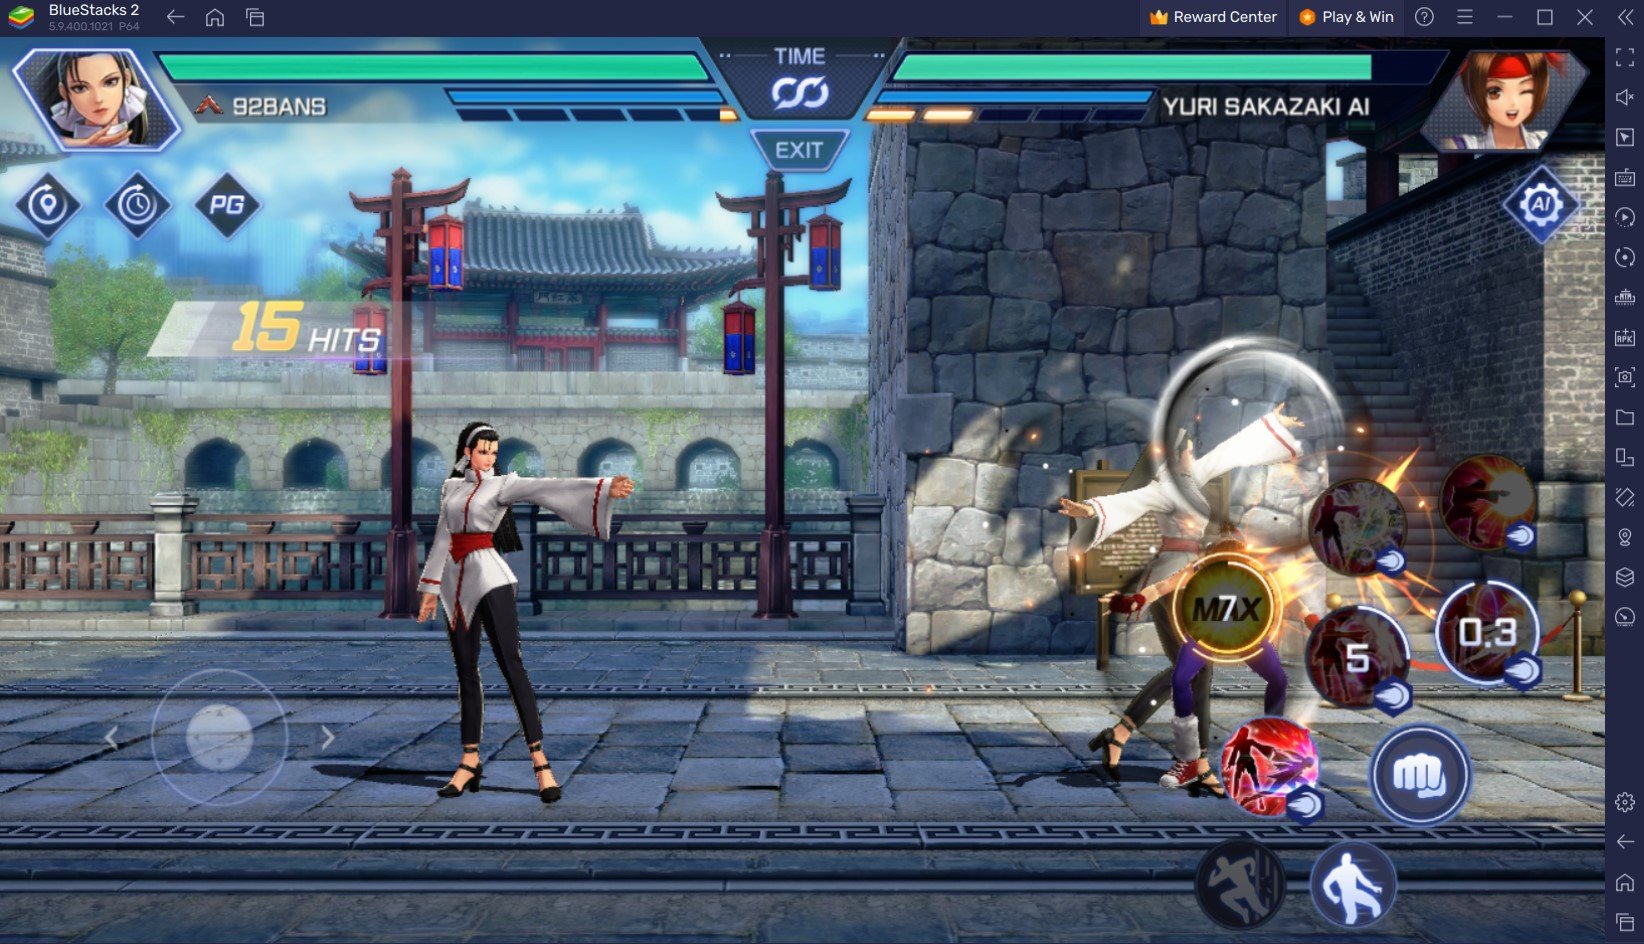 The King of Fighters ARENA Beginners Guide – Combat System, Ranked Mode, Currencies Explained